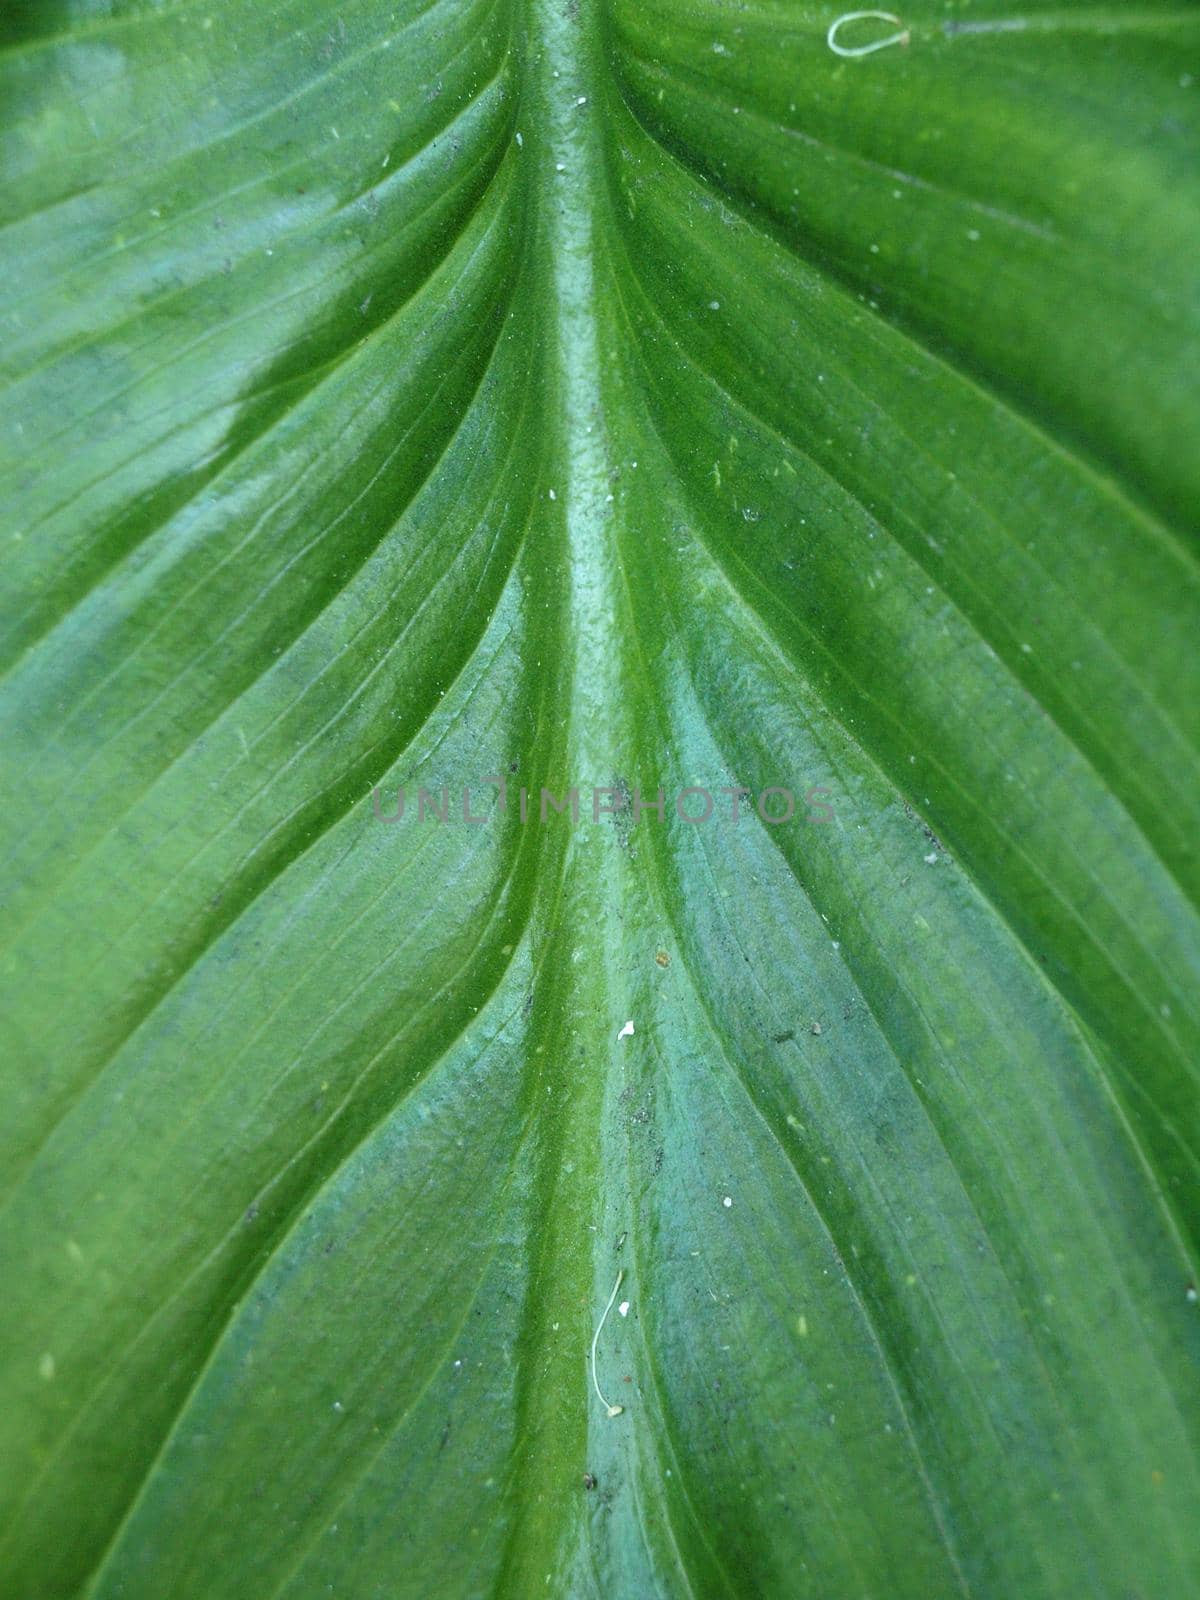 Macro of the surface of a green leaf lots of veins stretching out from the center. 